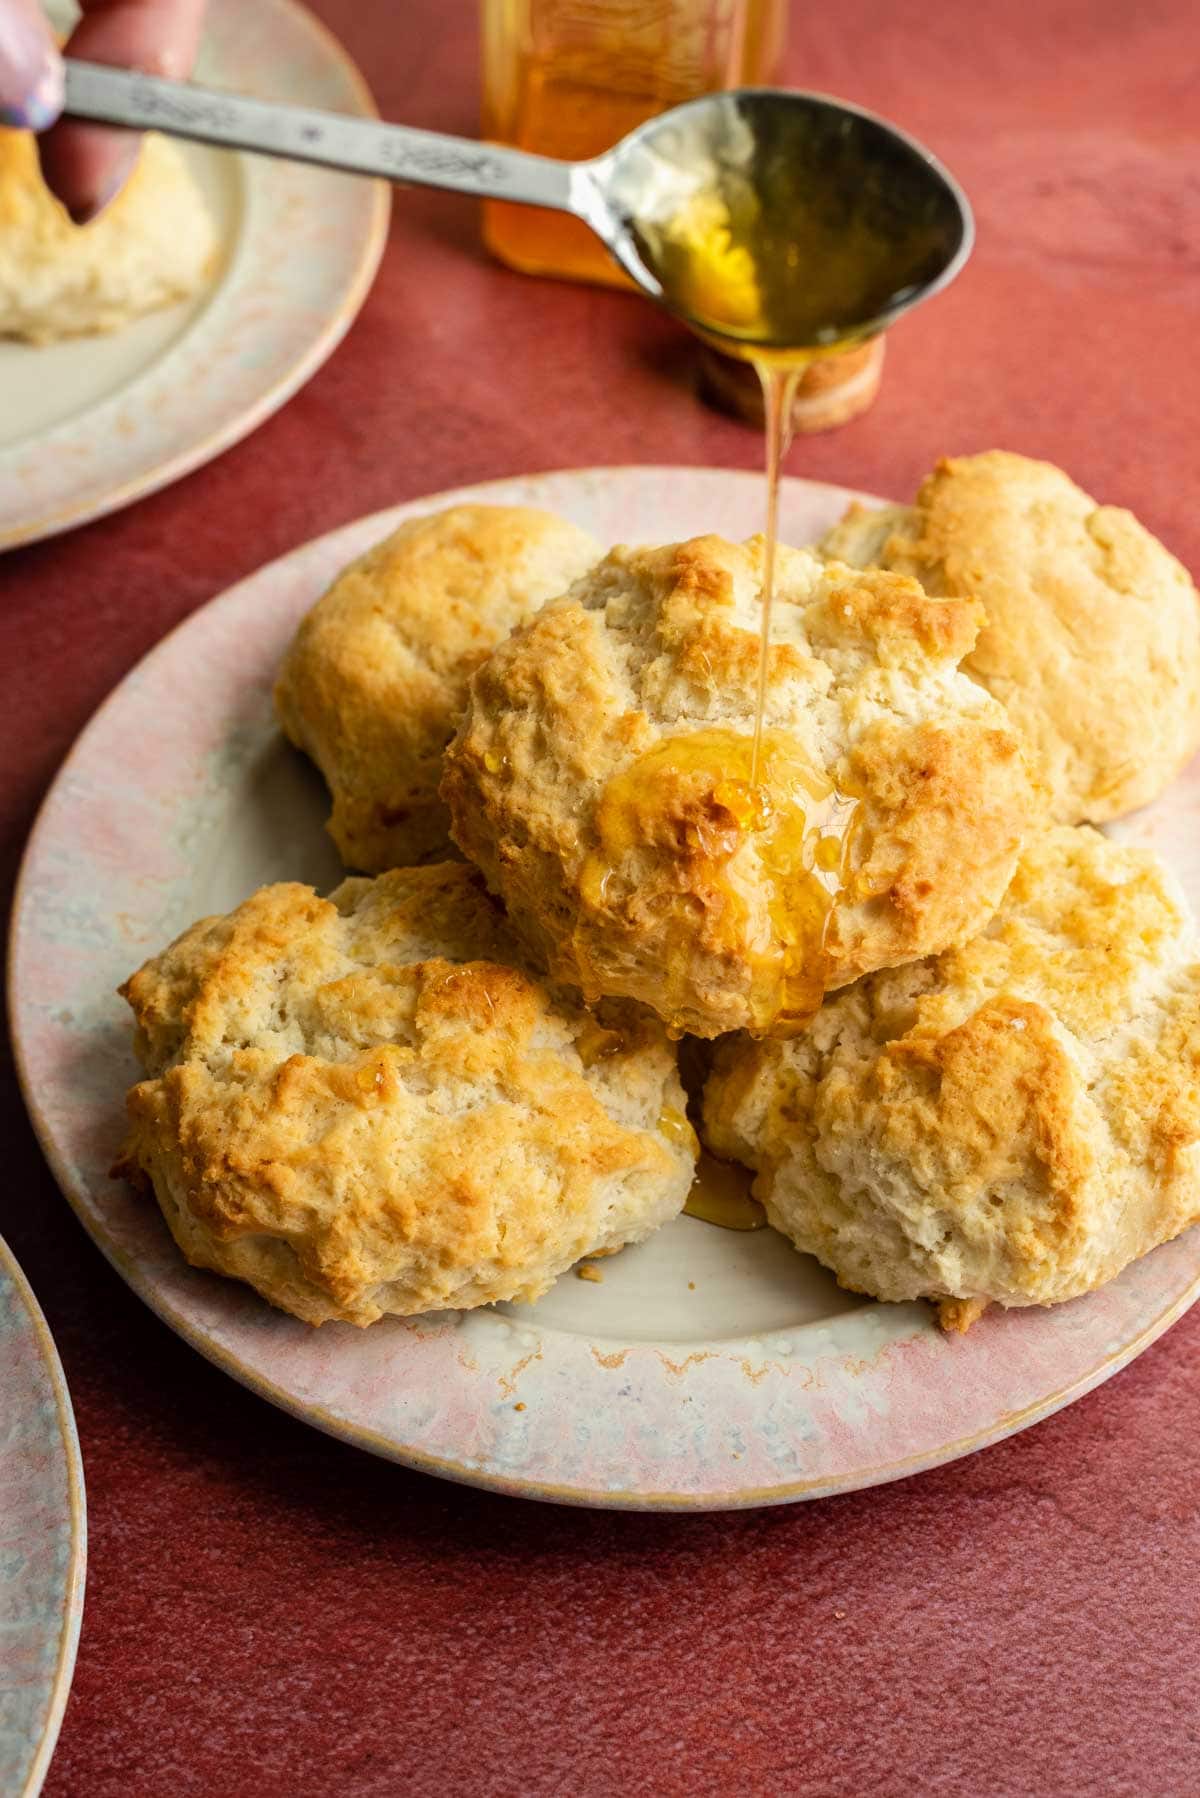 Three ingredient biscuits on a pink plate and being drizzled with honey on a red table.